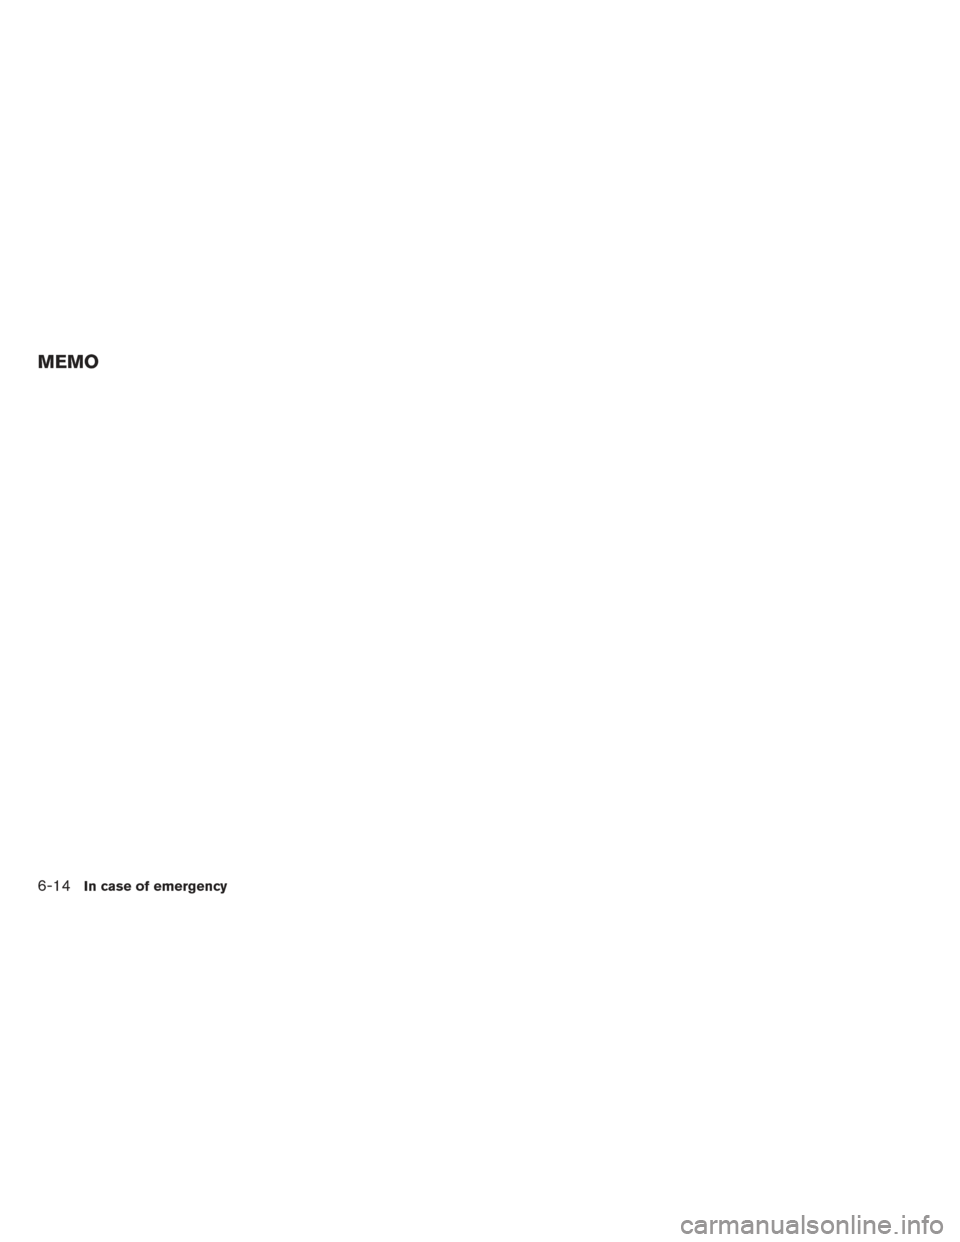 NISSAN ALTIMA 2014 L33 / 5.G Owners Manual MEMO
6-14In case of emergency 